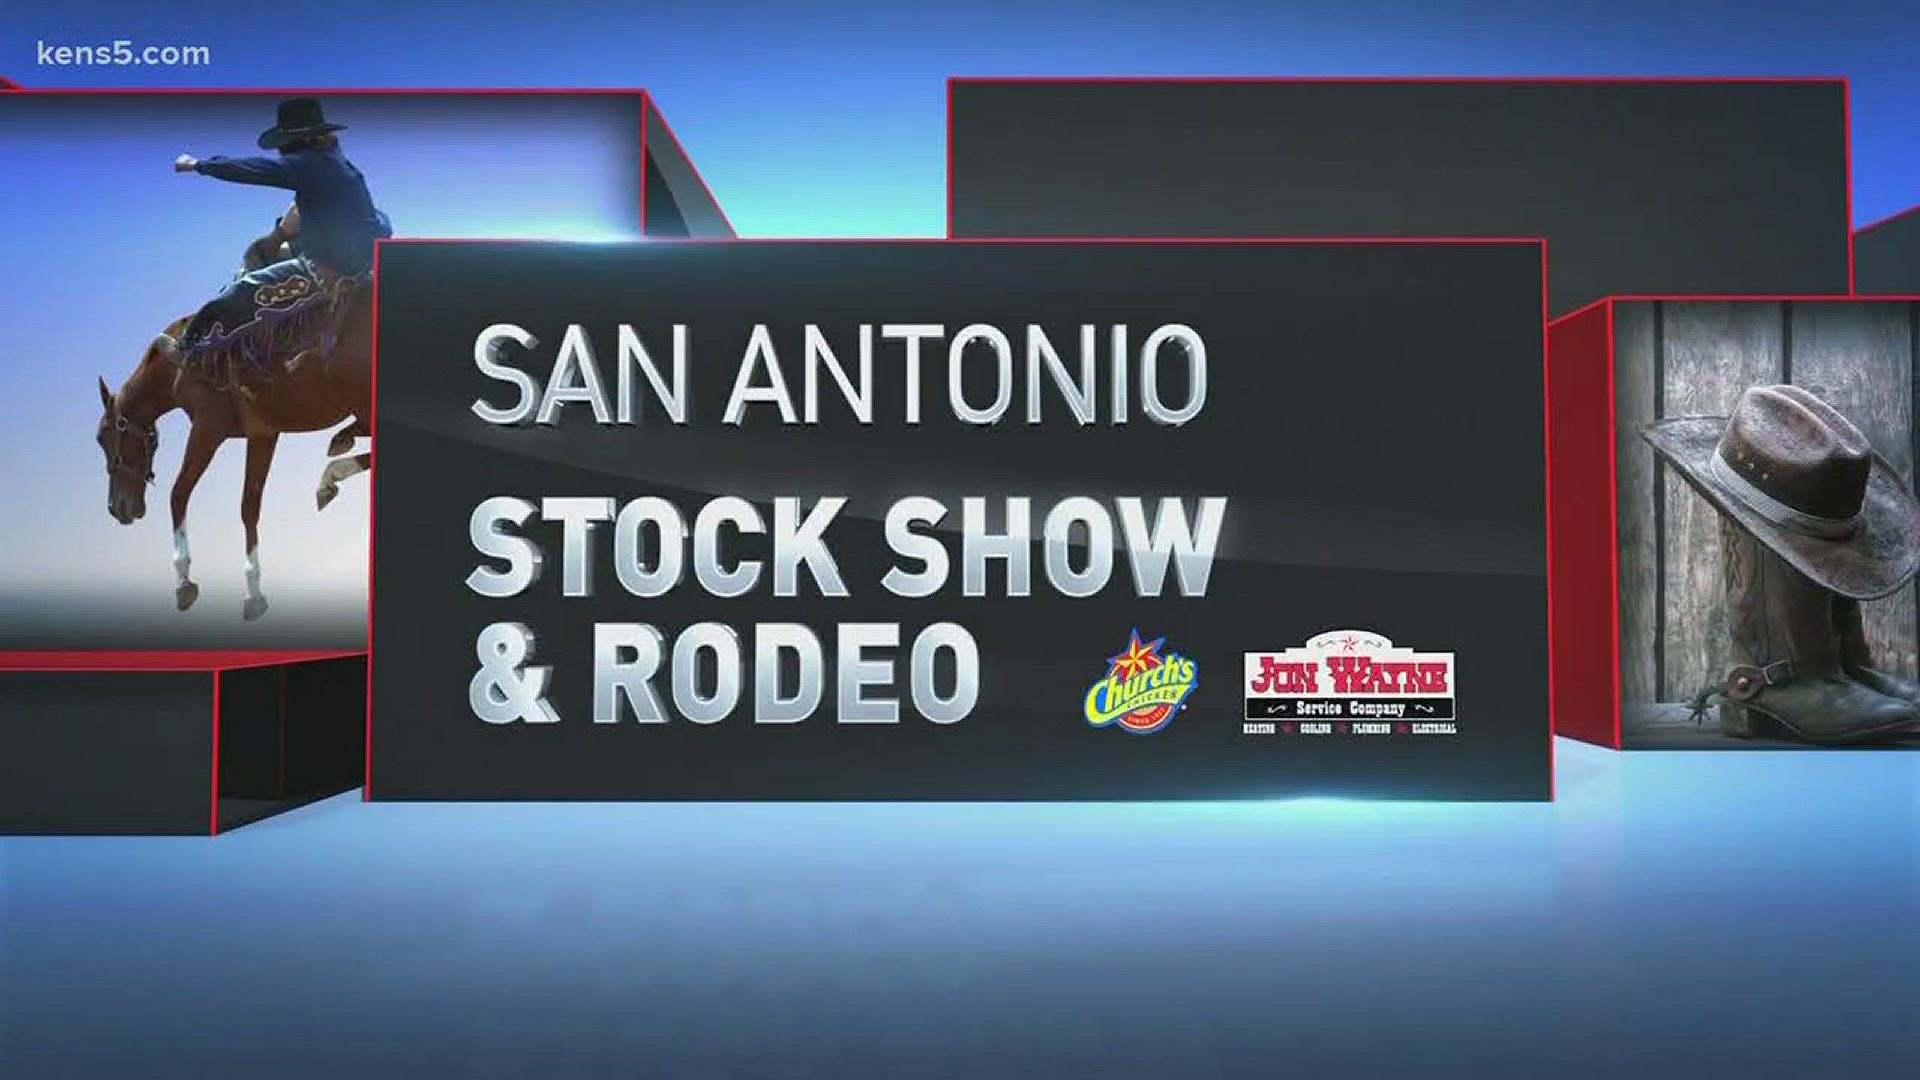 Zamon Zamora scored 87 points for hanging on tight at the San Antonio Stock Show & Rodeo.